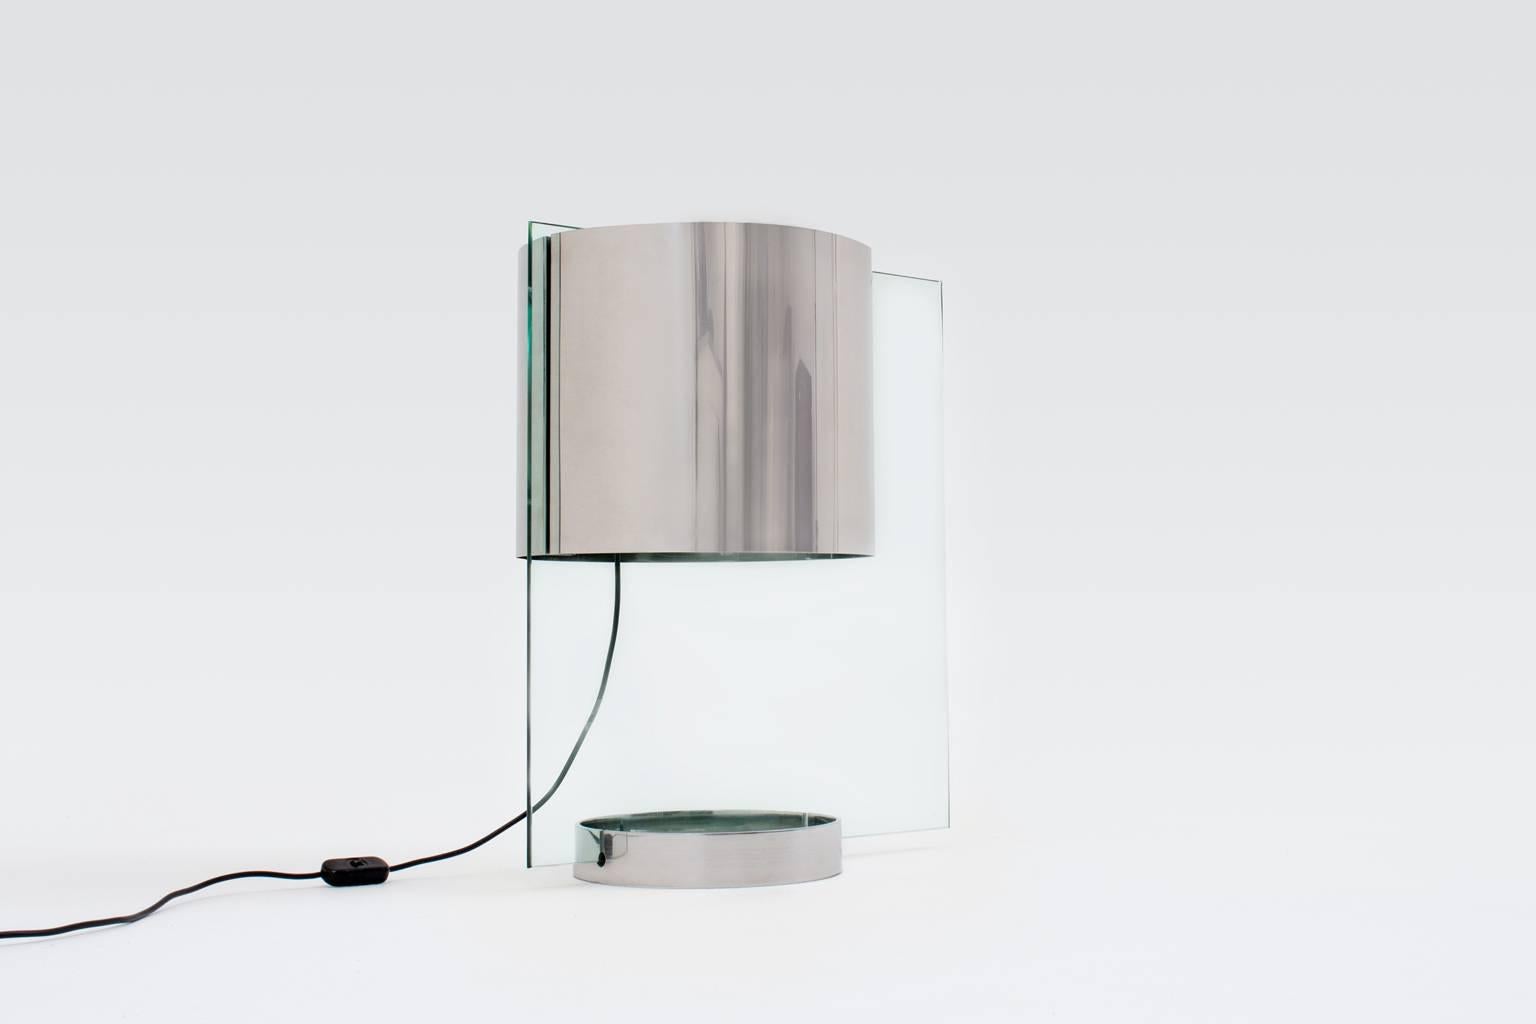 Rare table lamp by Lumenform, Italy, 1970. Extraordinary design made from a rectangular sheet of glass and stainless steel shade, base and lighting part.
This sophisticated sharp lined lamp provides a very nice light, light is transported true the